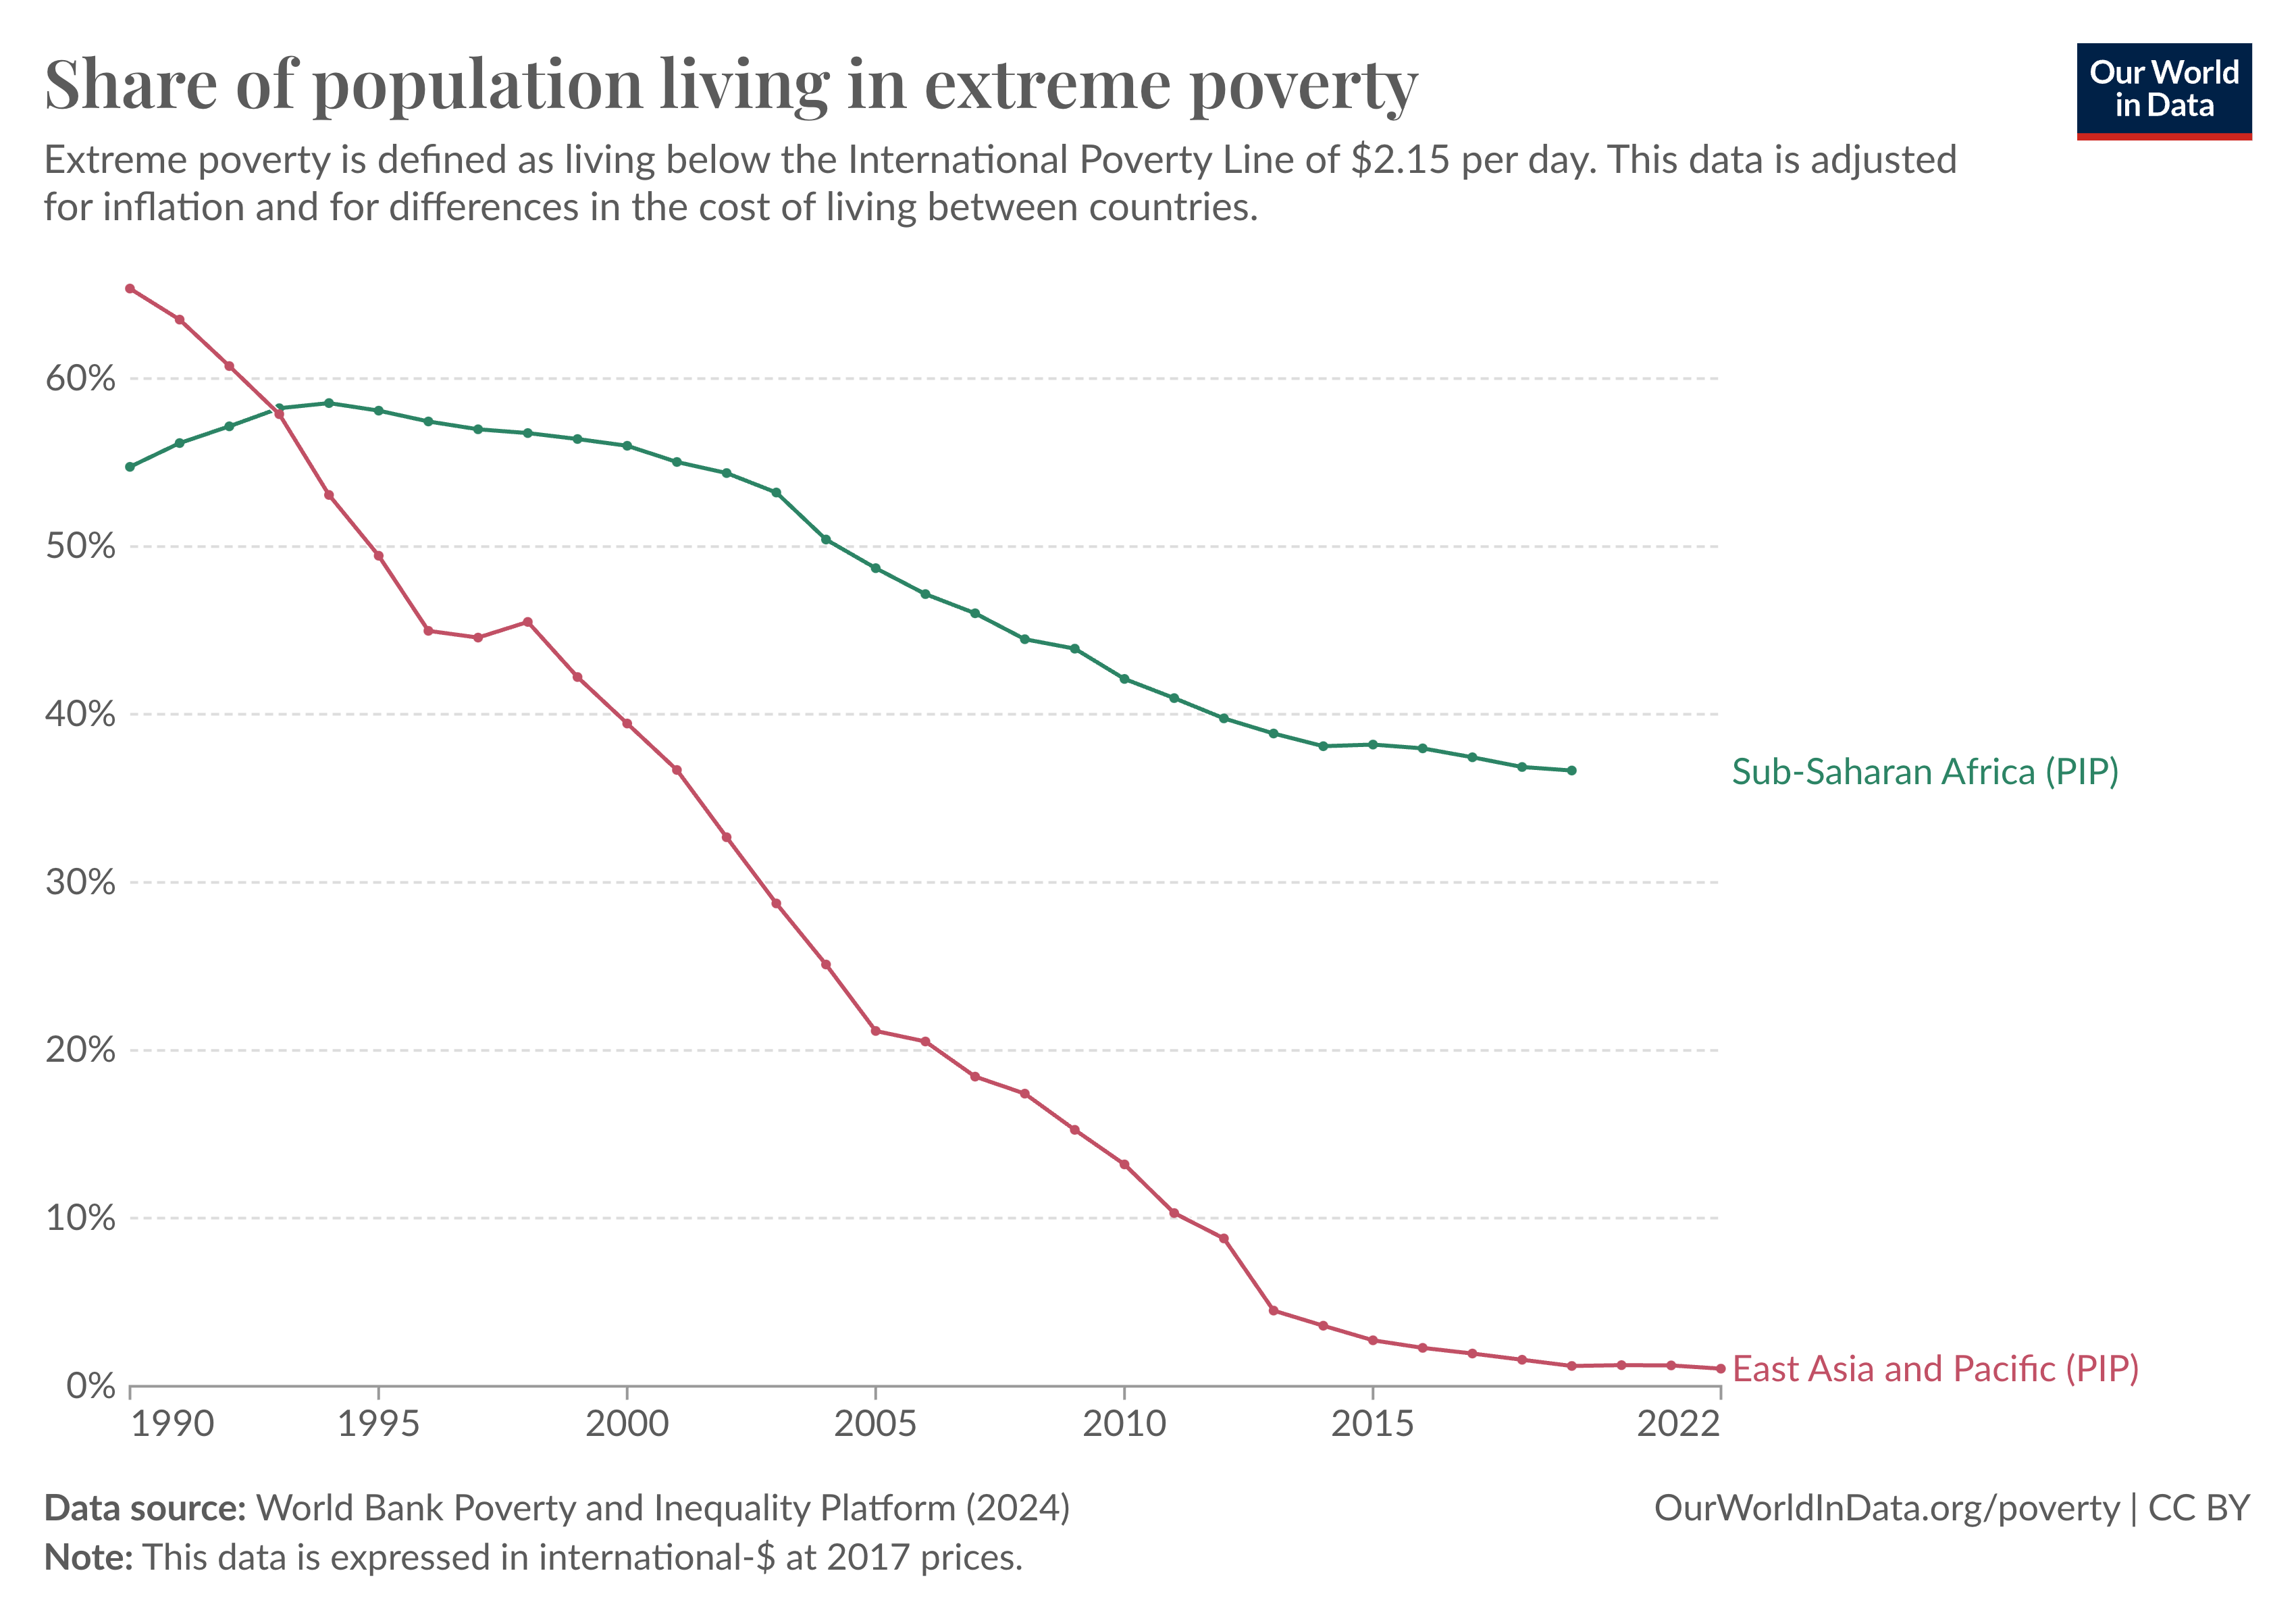 A line chart titled "Share of population living in extreme poverty." The chart tracks the percentage of the population living below the International Poverty Line of $2.15 per day in Sub-Saharan Africa and East Asia and Pacific from 1990 to 2022. The y-axis ranges from 0% to 60%, and the x-axis ranges from 1990 to 2022. Two lines are shown: one for Sub-Saharan Africa (in red) starting at around 55% in 1990 and gradually declining to around 35% by 2022; the other for East Asia and Pacific (in brown) starting at about 60% in 1990 and dropping steeply to around 2% by 2022. The data source is the World Bank Poverty and Inequality Platform (2024). A note mentions the data is expressed in international dollars at 2017 prices. The chart is produced by Our World in Data.
